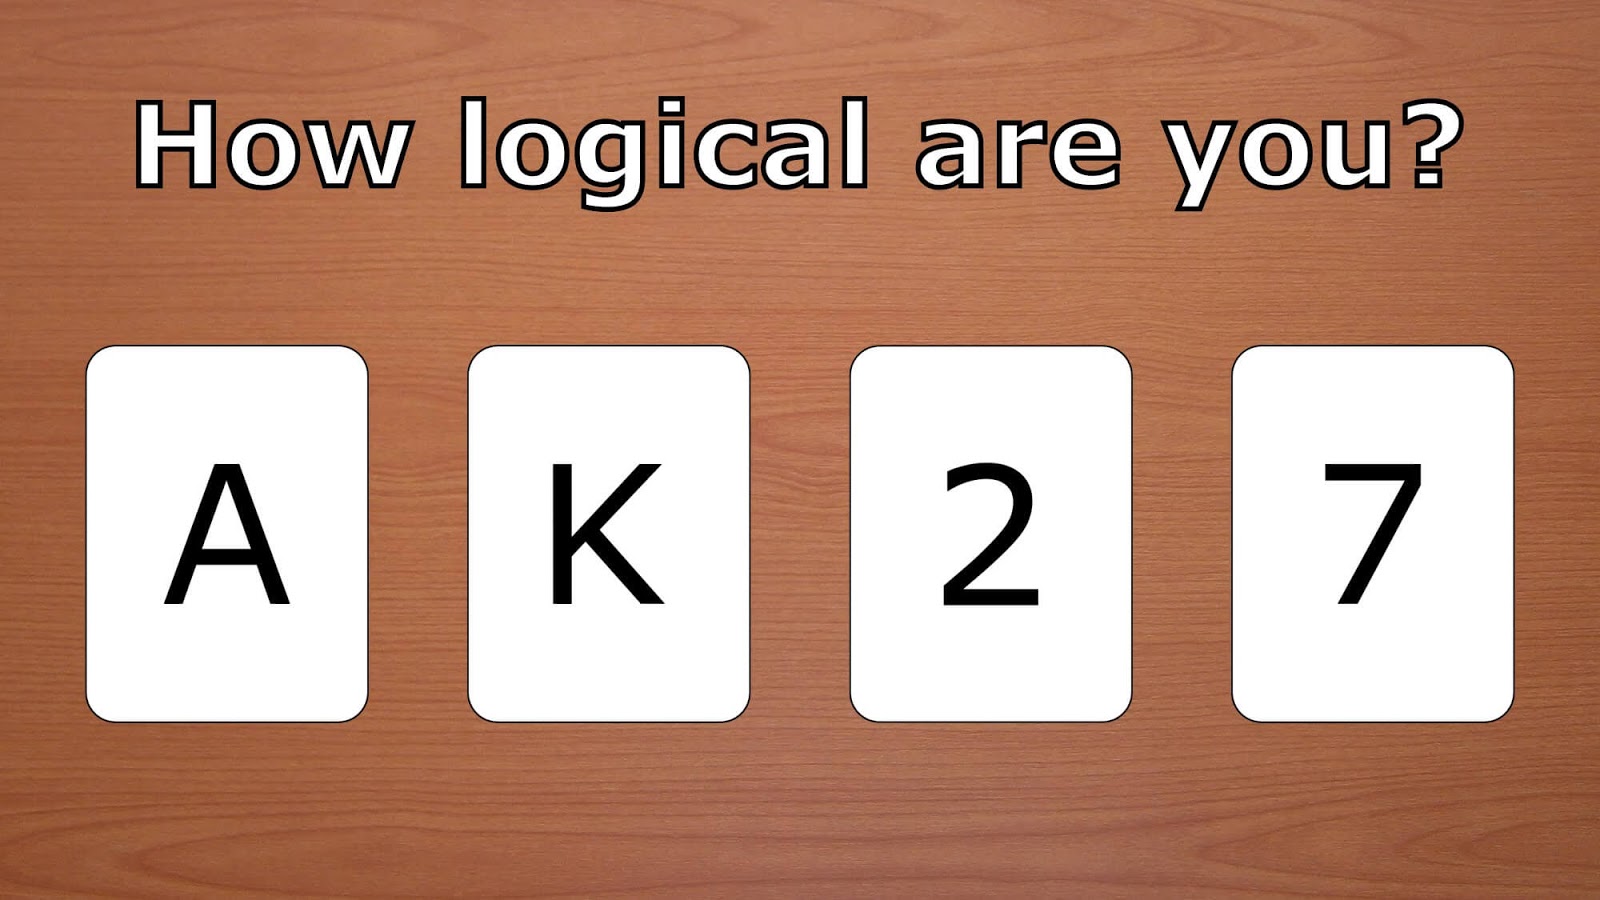 This Brilliant Quiz Will Determine How Logical You Are Based On The Psychology of Reasoning